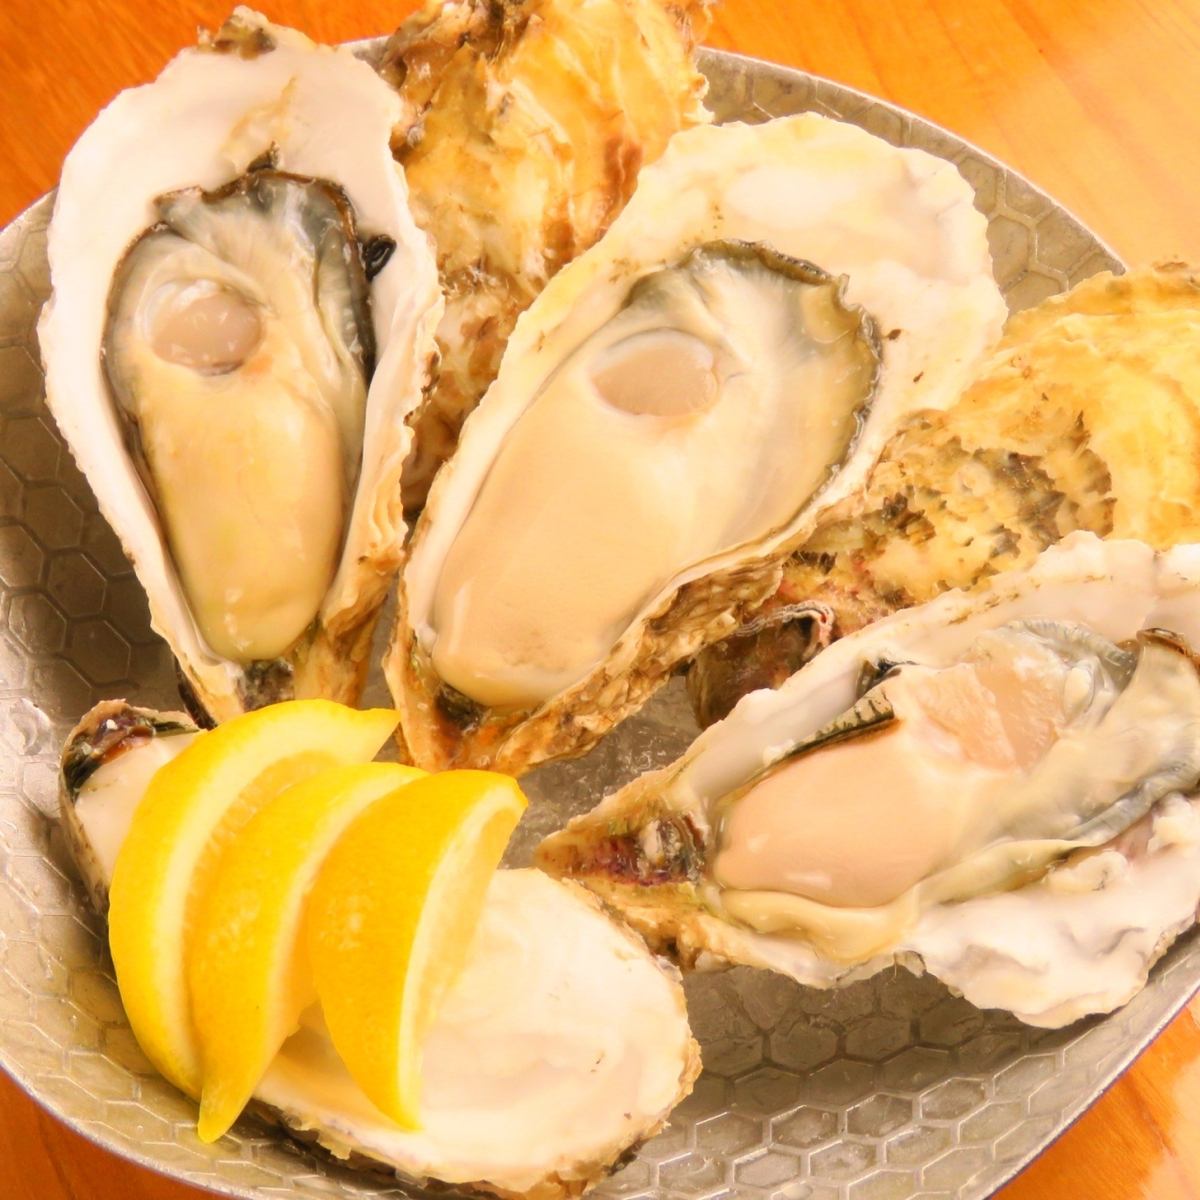 Raw oysters are stored in refrigerators and cooking utensils specifically designed for oysters!